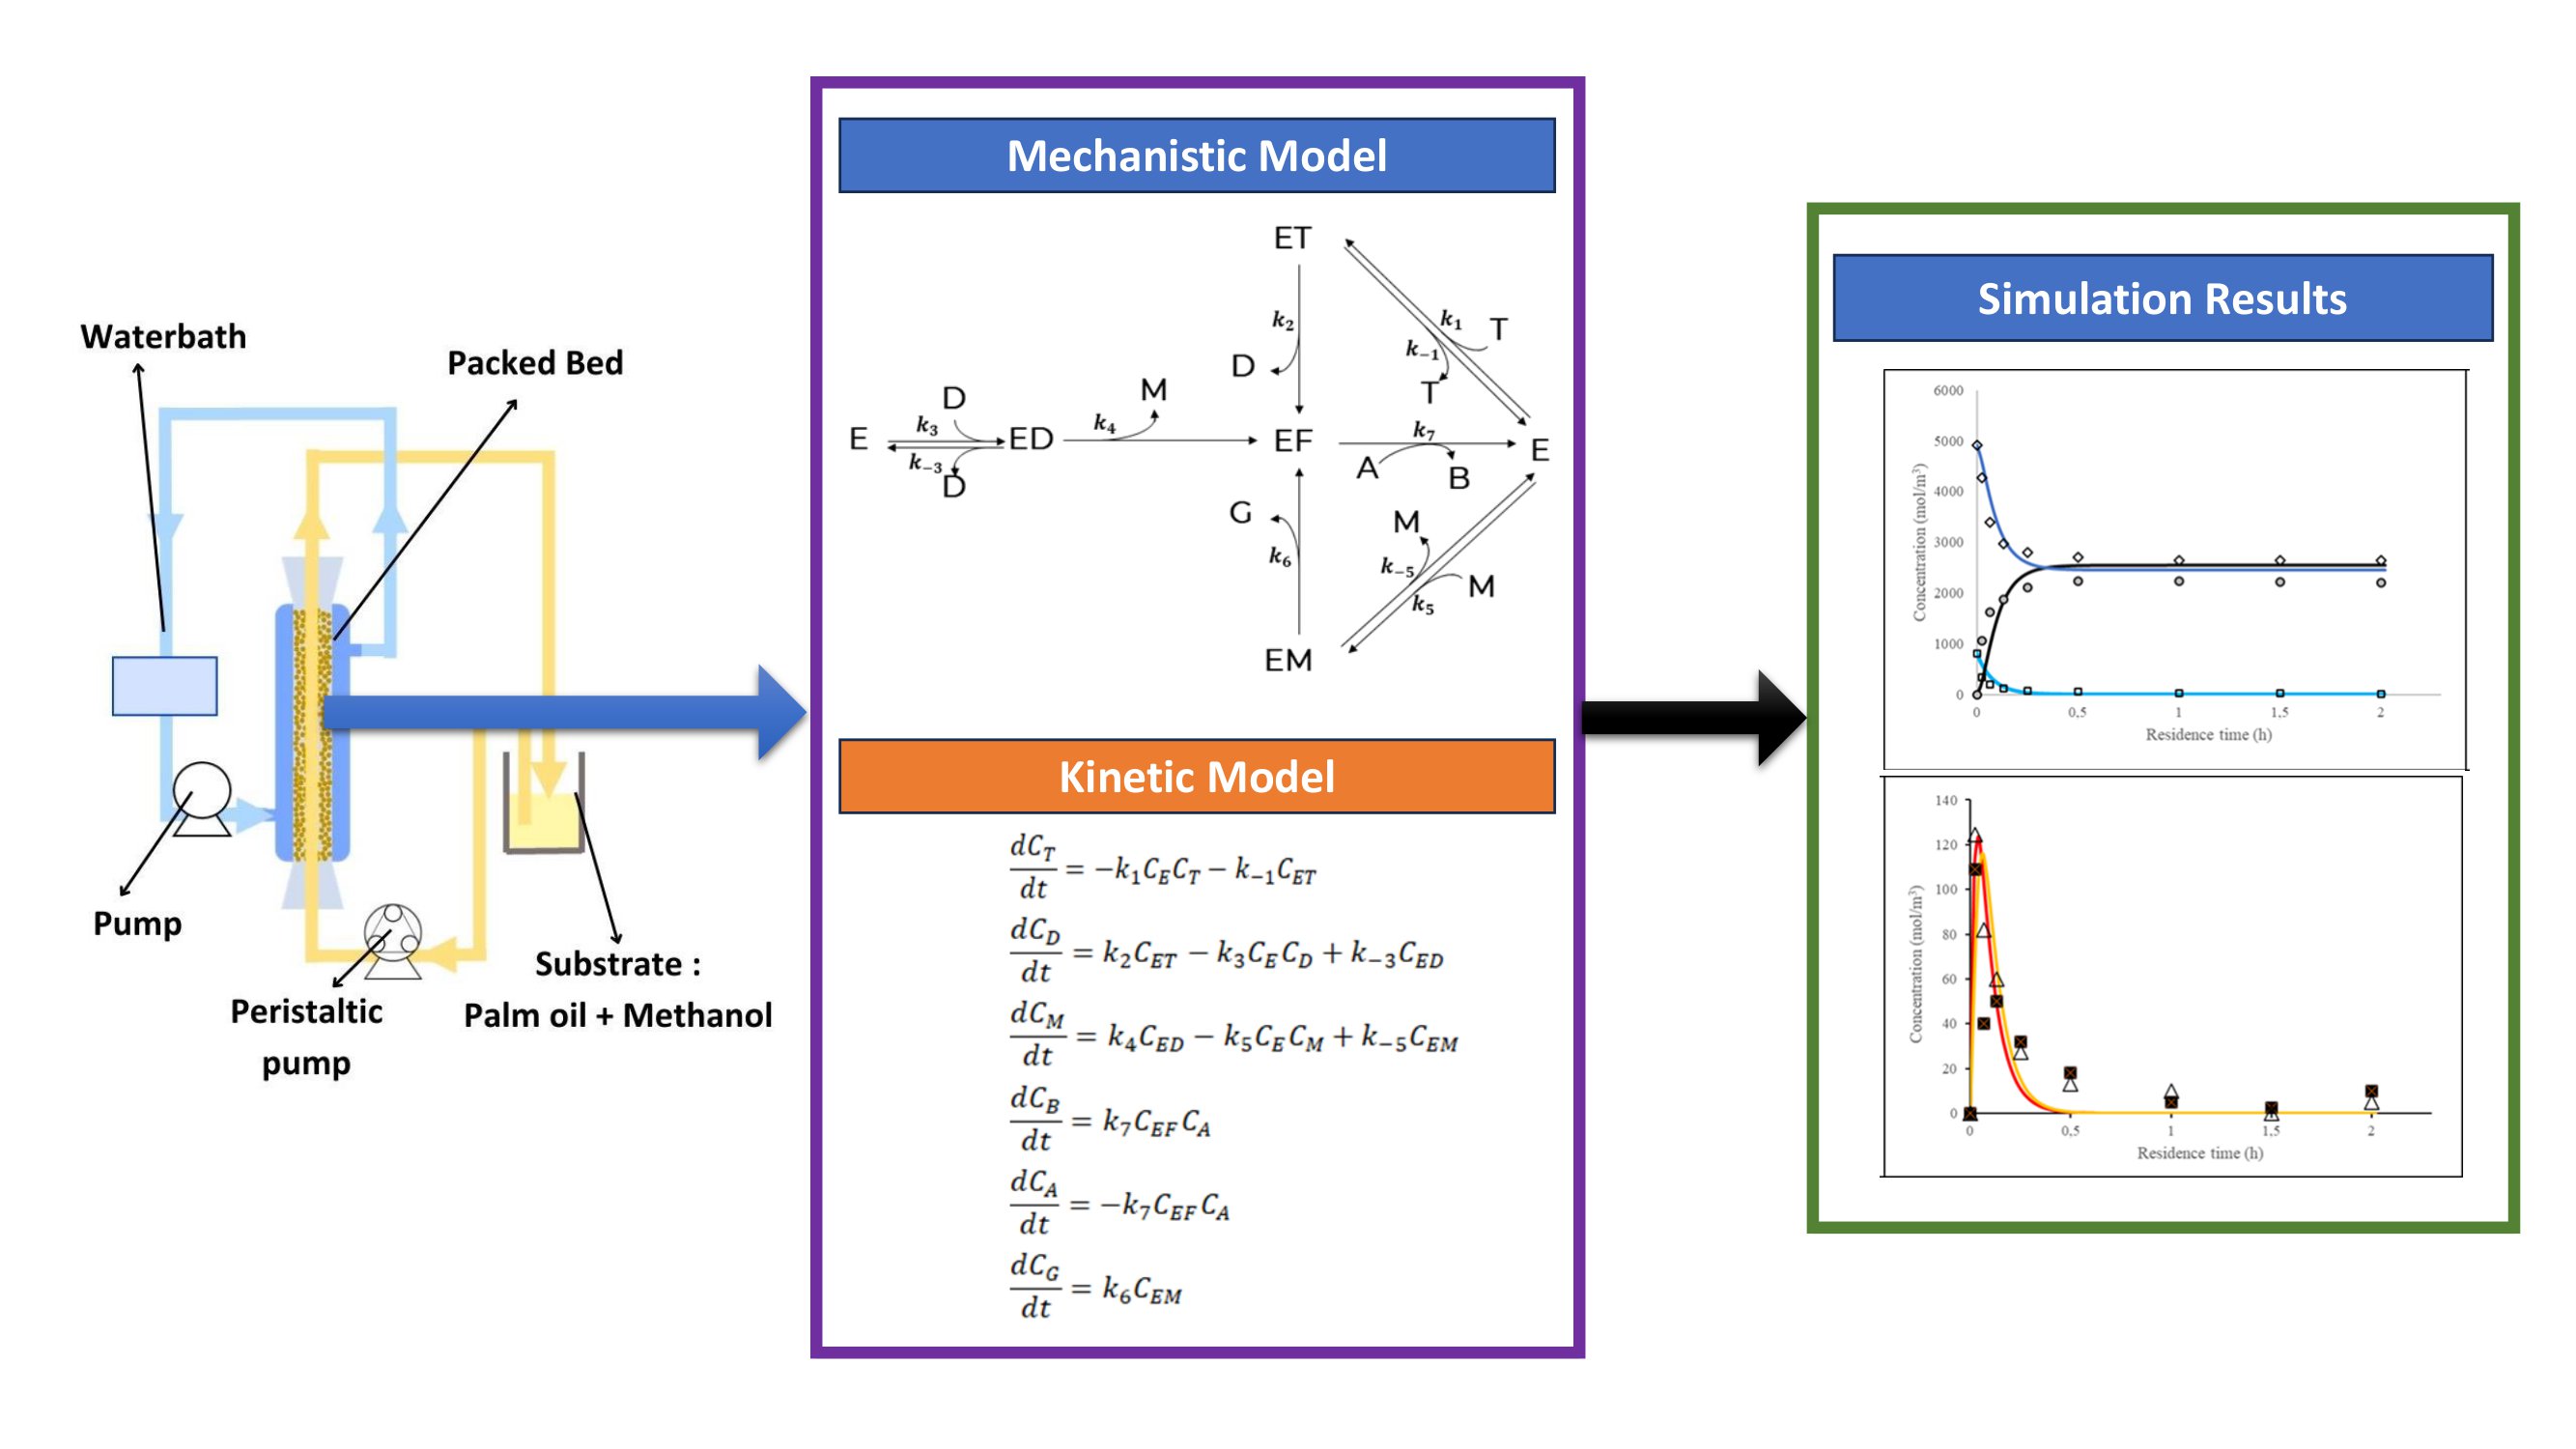 A Novel Kinetic Model of Enzymatic Biodiesel Production in a Recirculating Fixed Bed Reactor